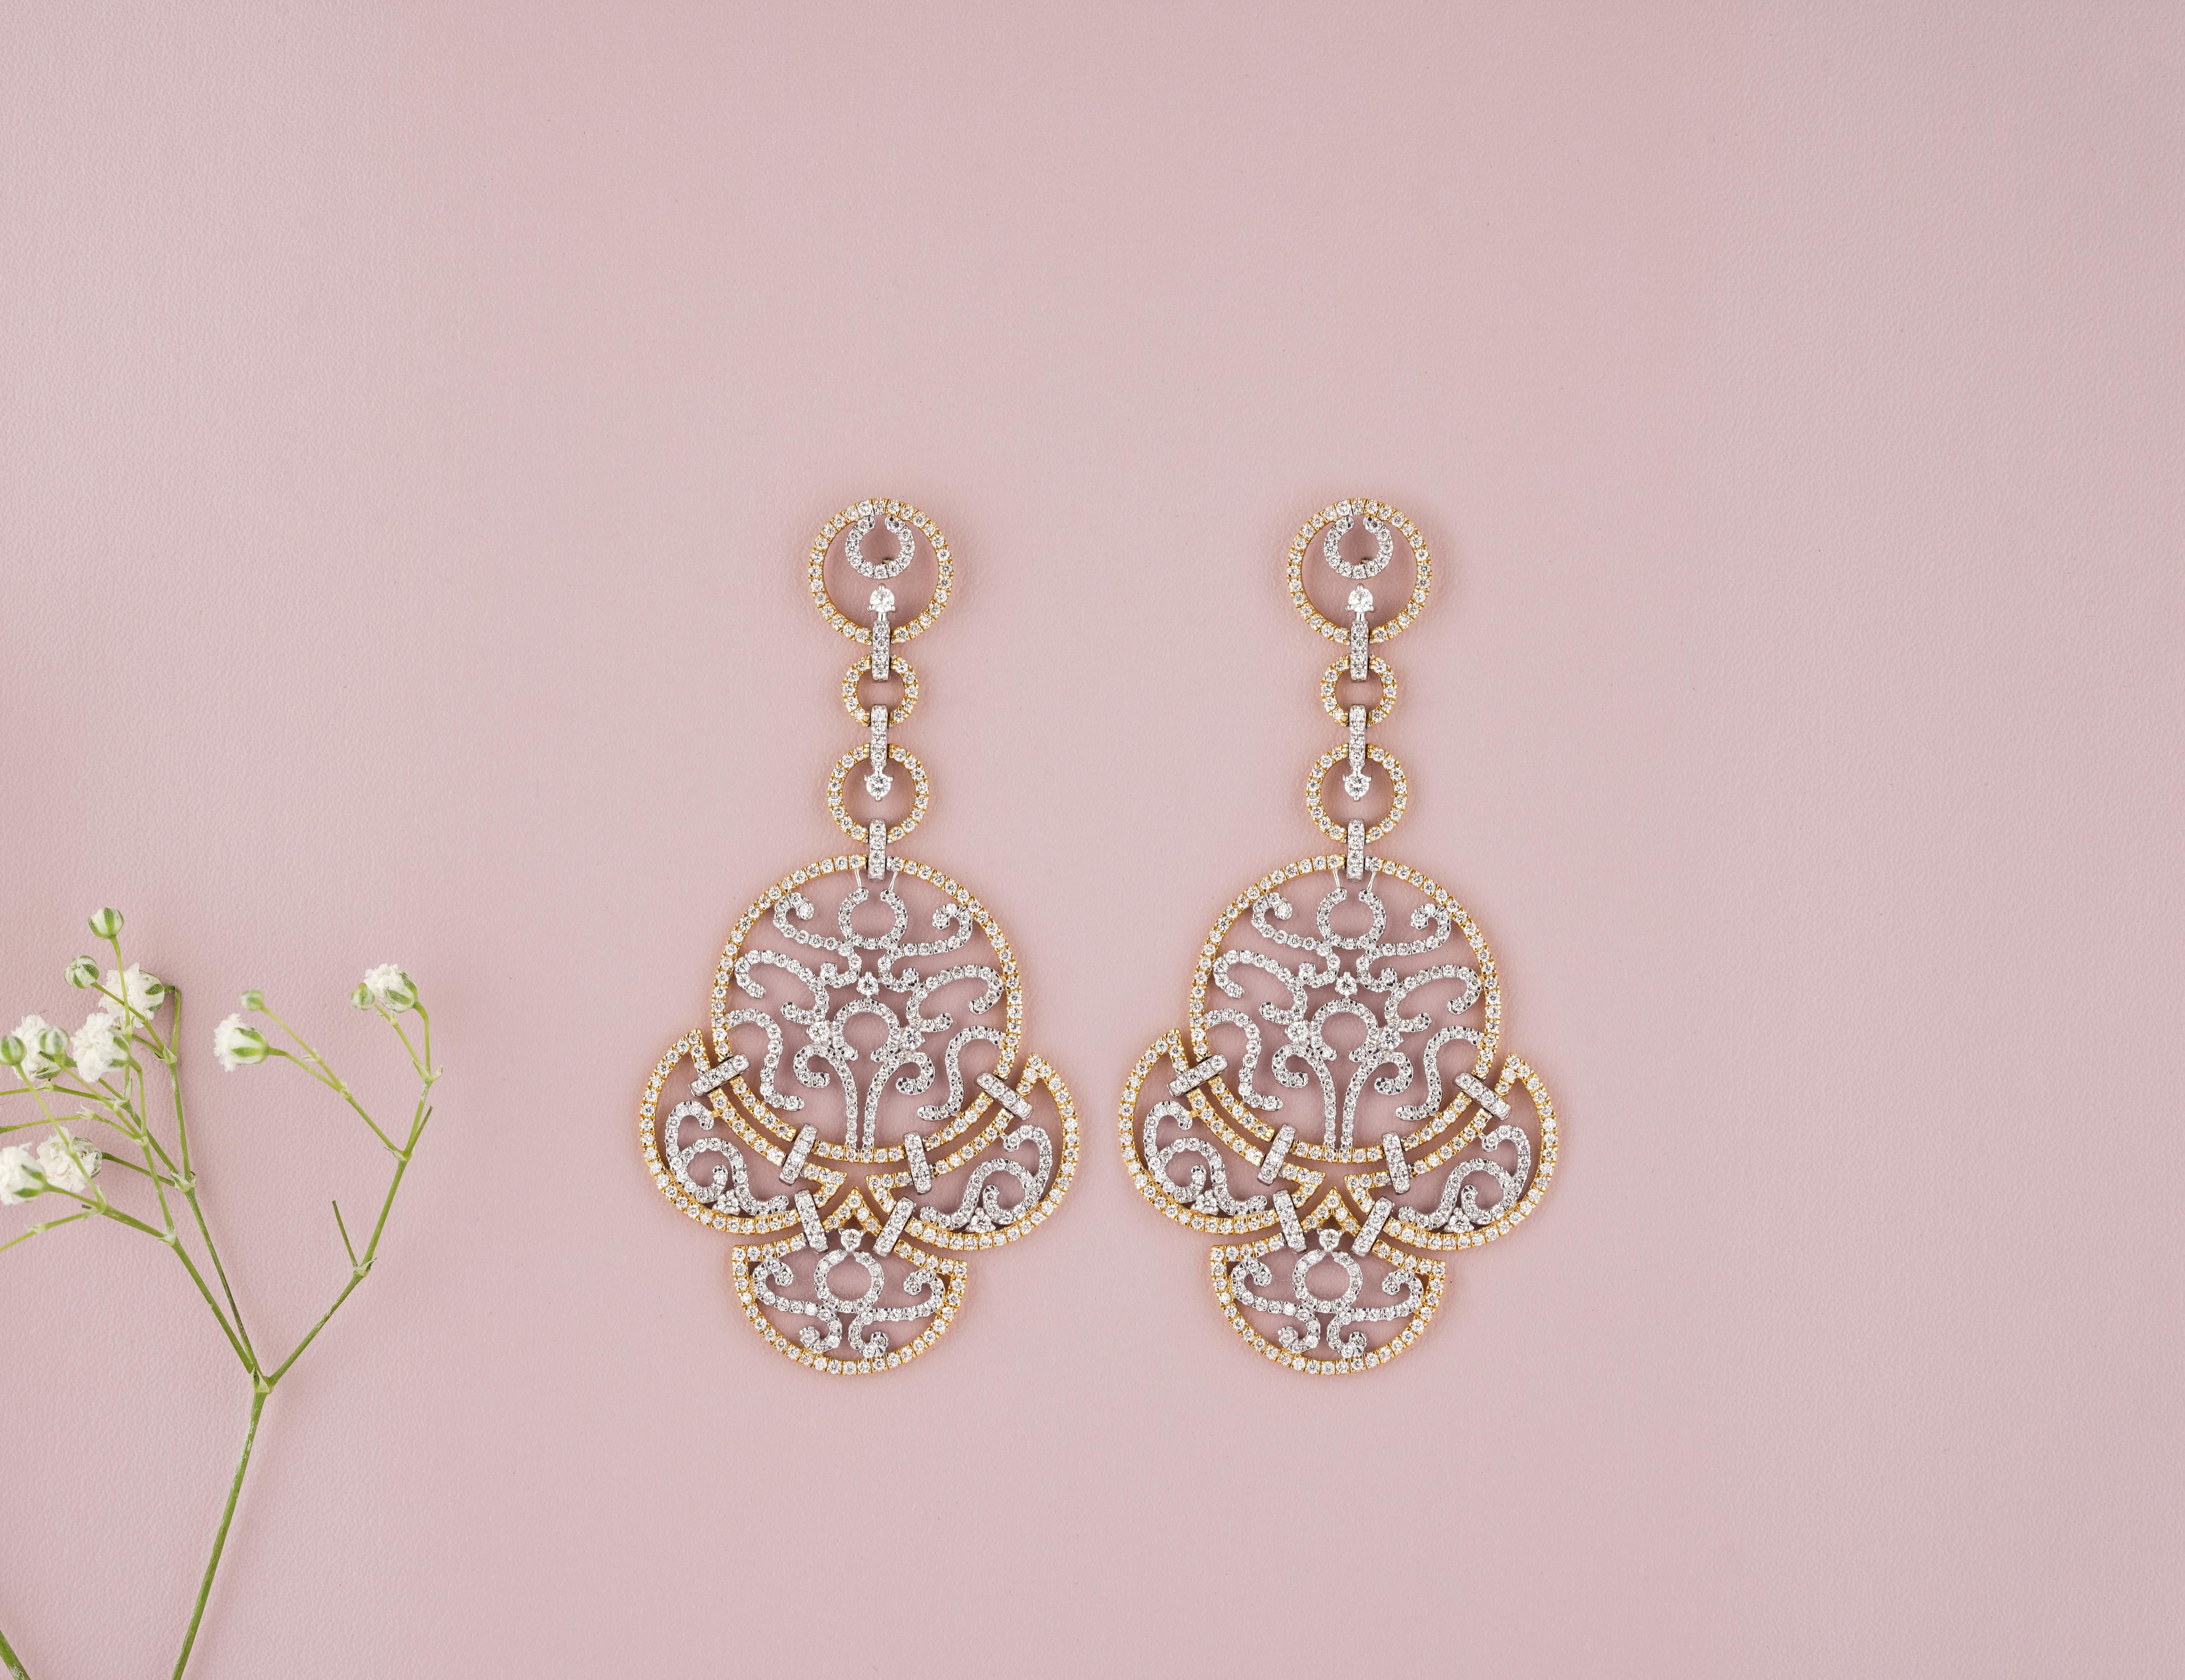 These exquisite earrings feature a filigree design crafted from 18k solid gold, delicately showcasing intricate patterns. Each earring is adorned with a sparkling diamond that dangles gracefully, adding an elegant and luxurious touch to the overall